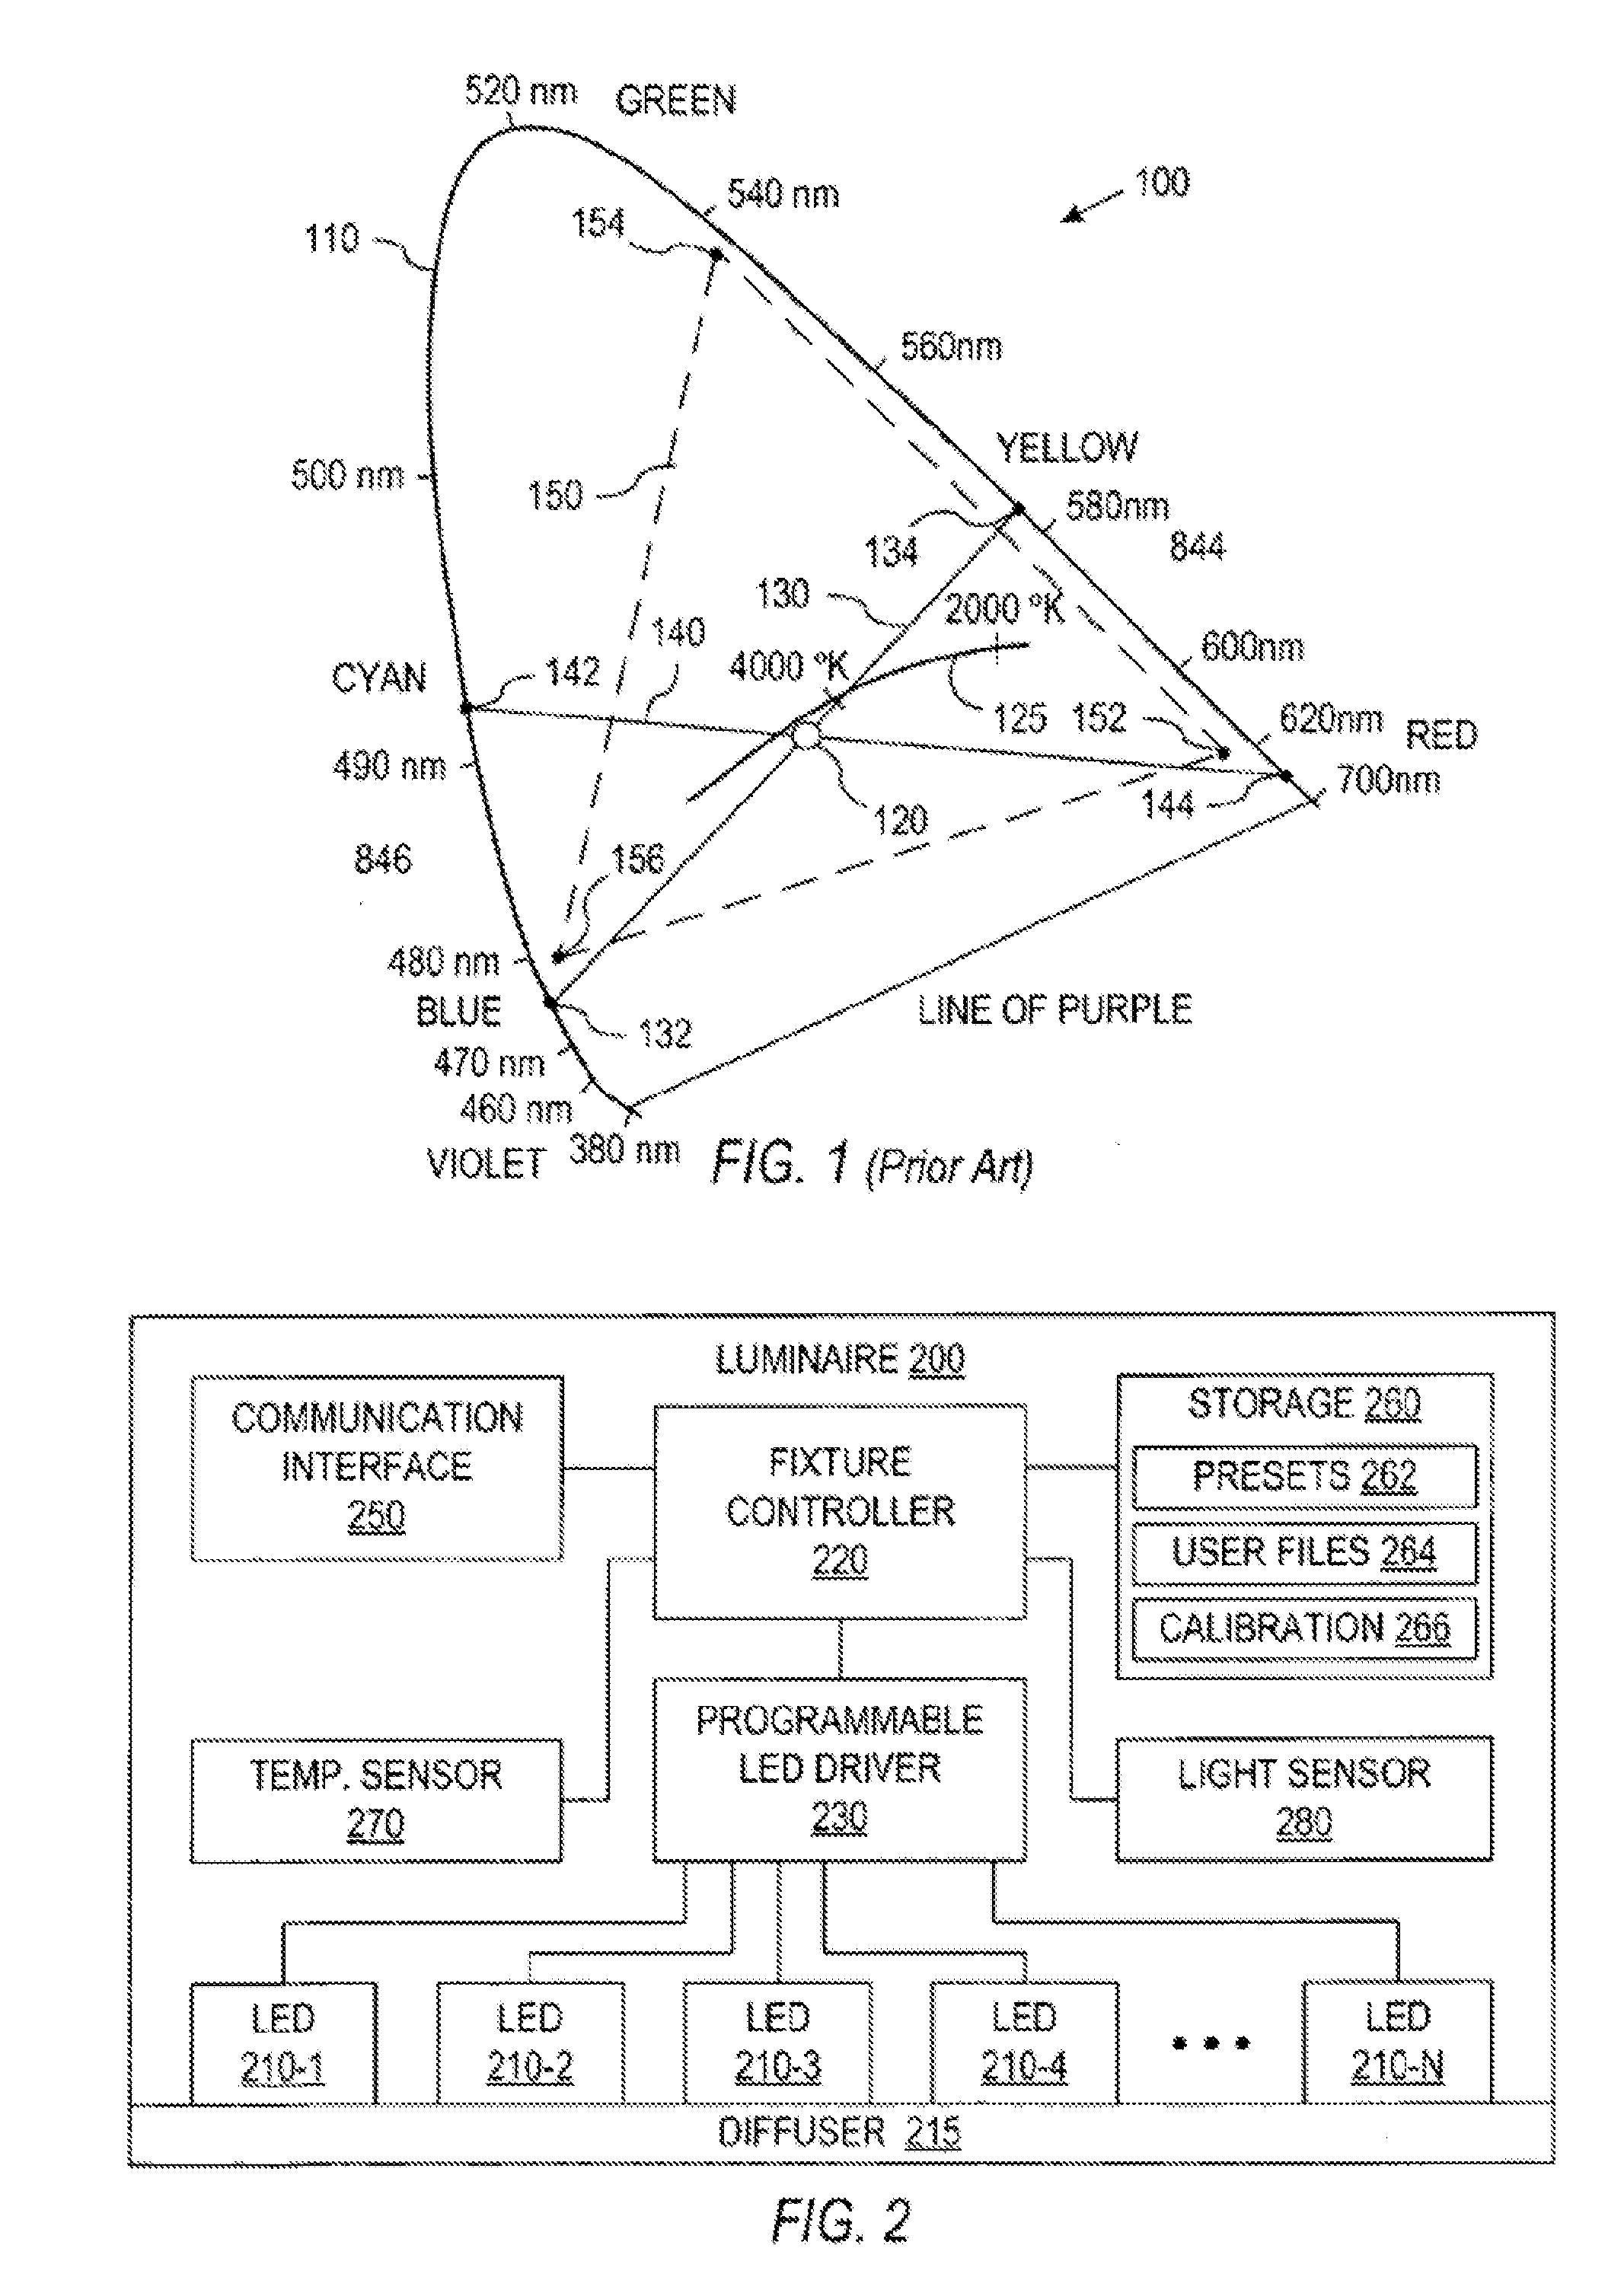 Systems and Methods for Developing and Distributing Illumination Data Files